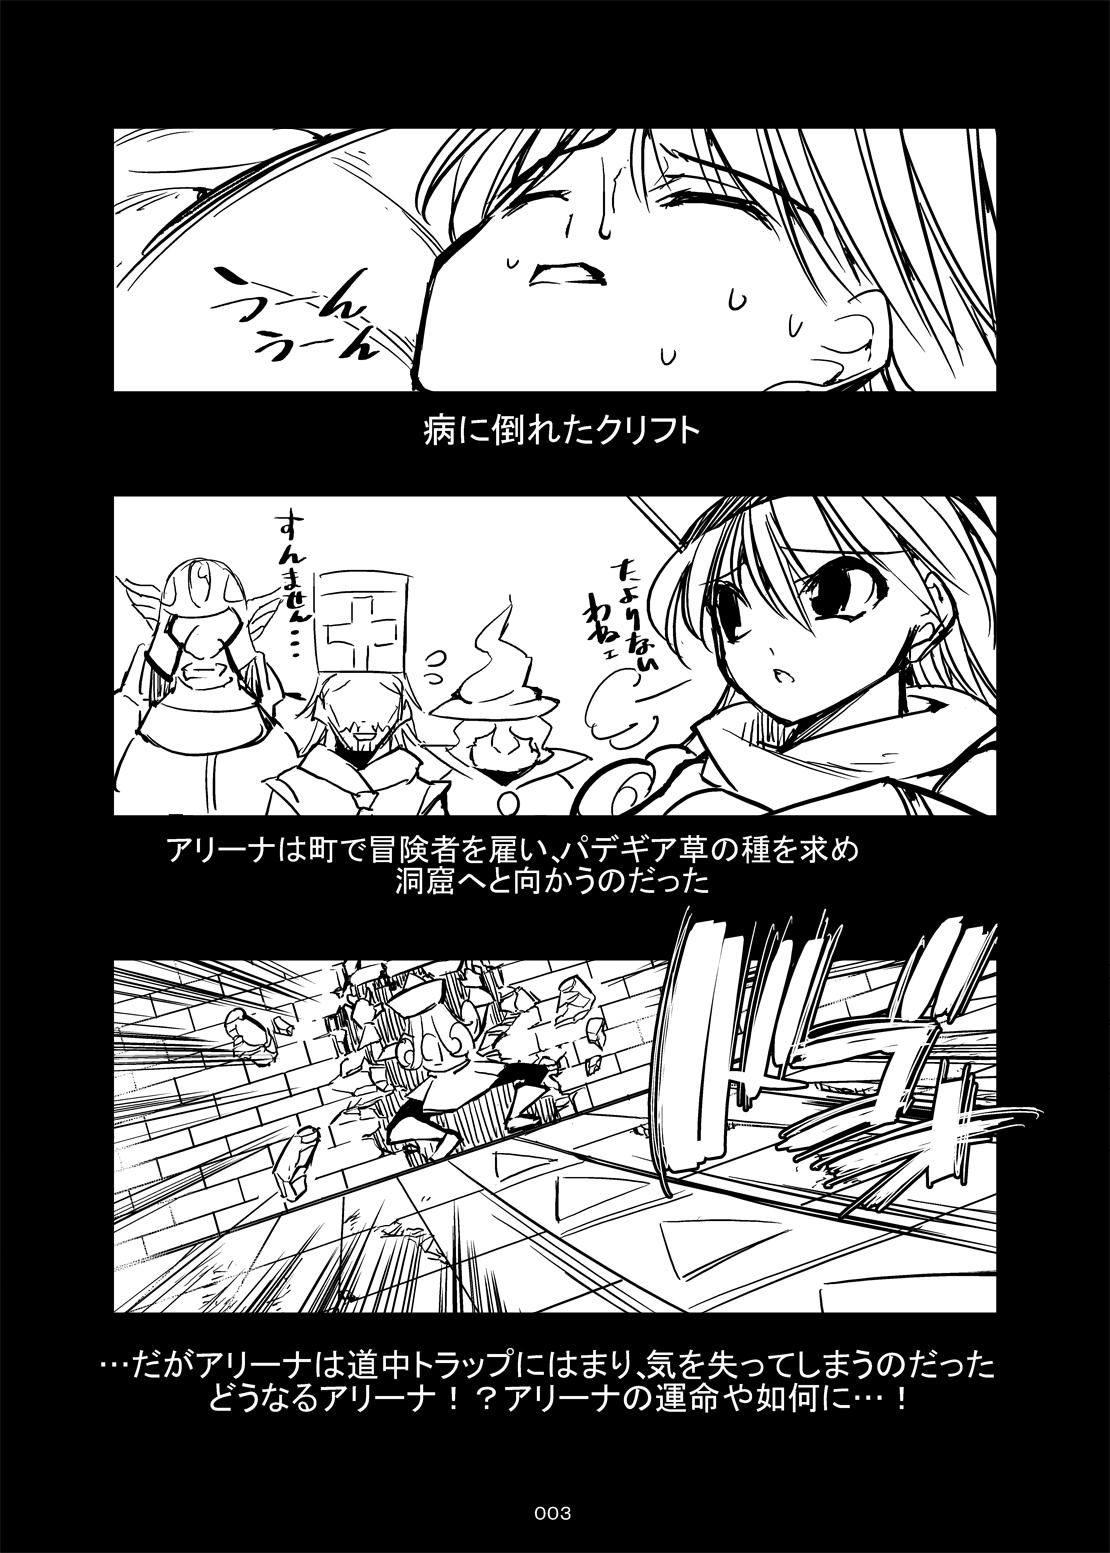 Gaping Medapani Quest Alena Hen - Dragon quest iv Shorts - Page 2